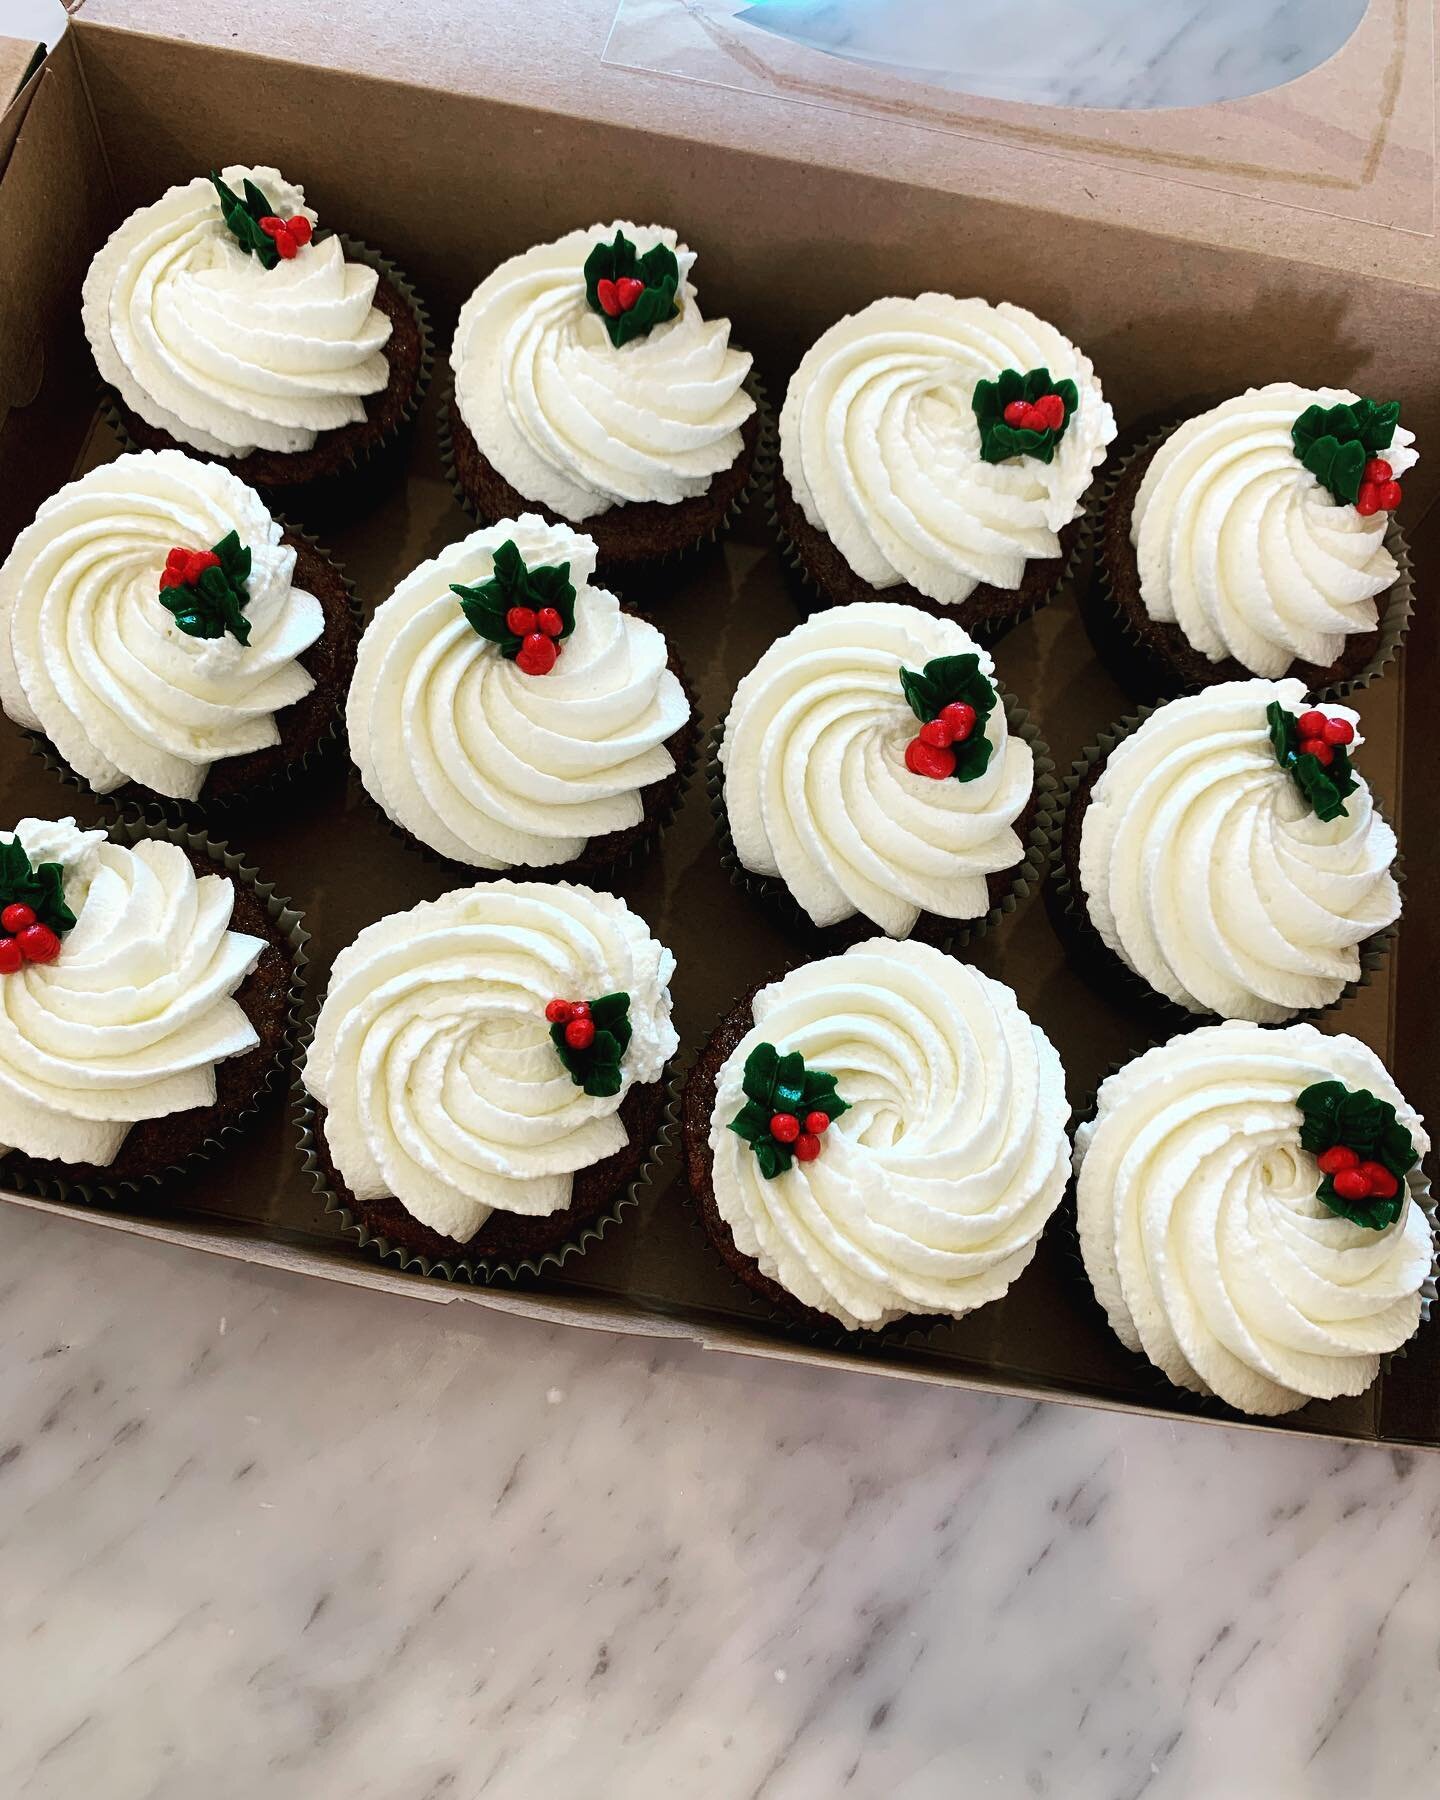 Carrot cake, cream cheese buttercream, and some piped buttercream holly 🎅#christmascupcakes #hostestwiththemostest #hostessgift #christmas #cupcakes #carrotcake #pasorobles #atascadero #slo #sanluisobispocounty